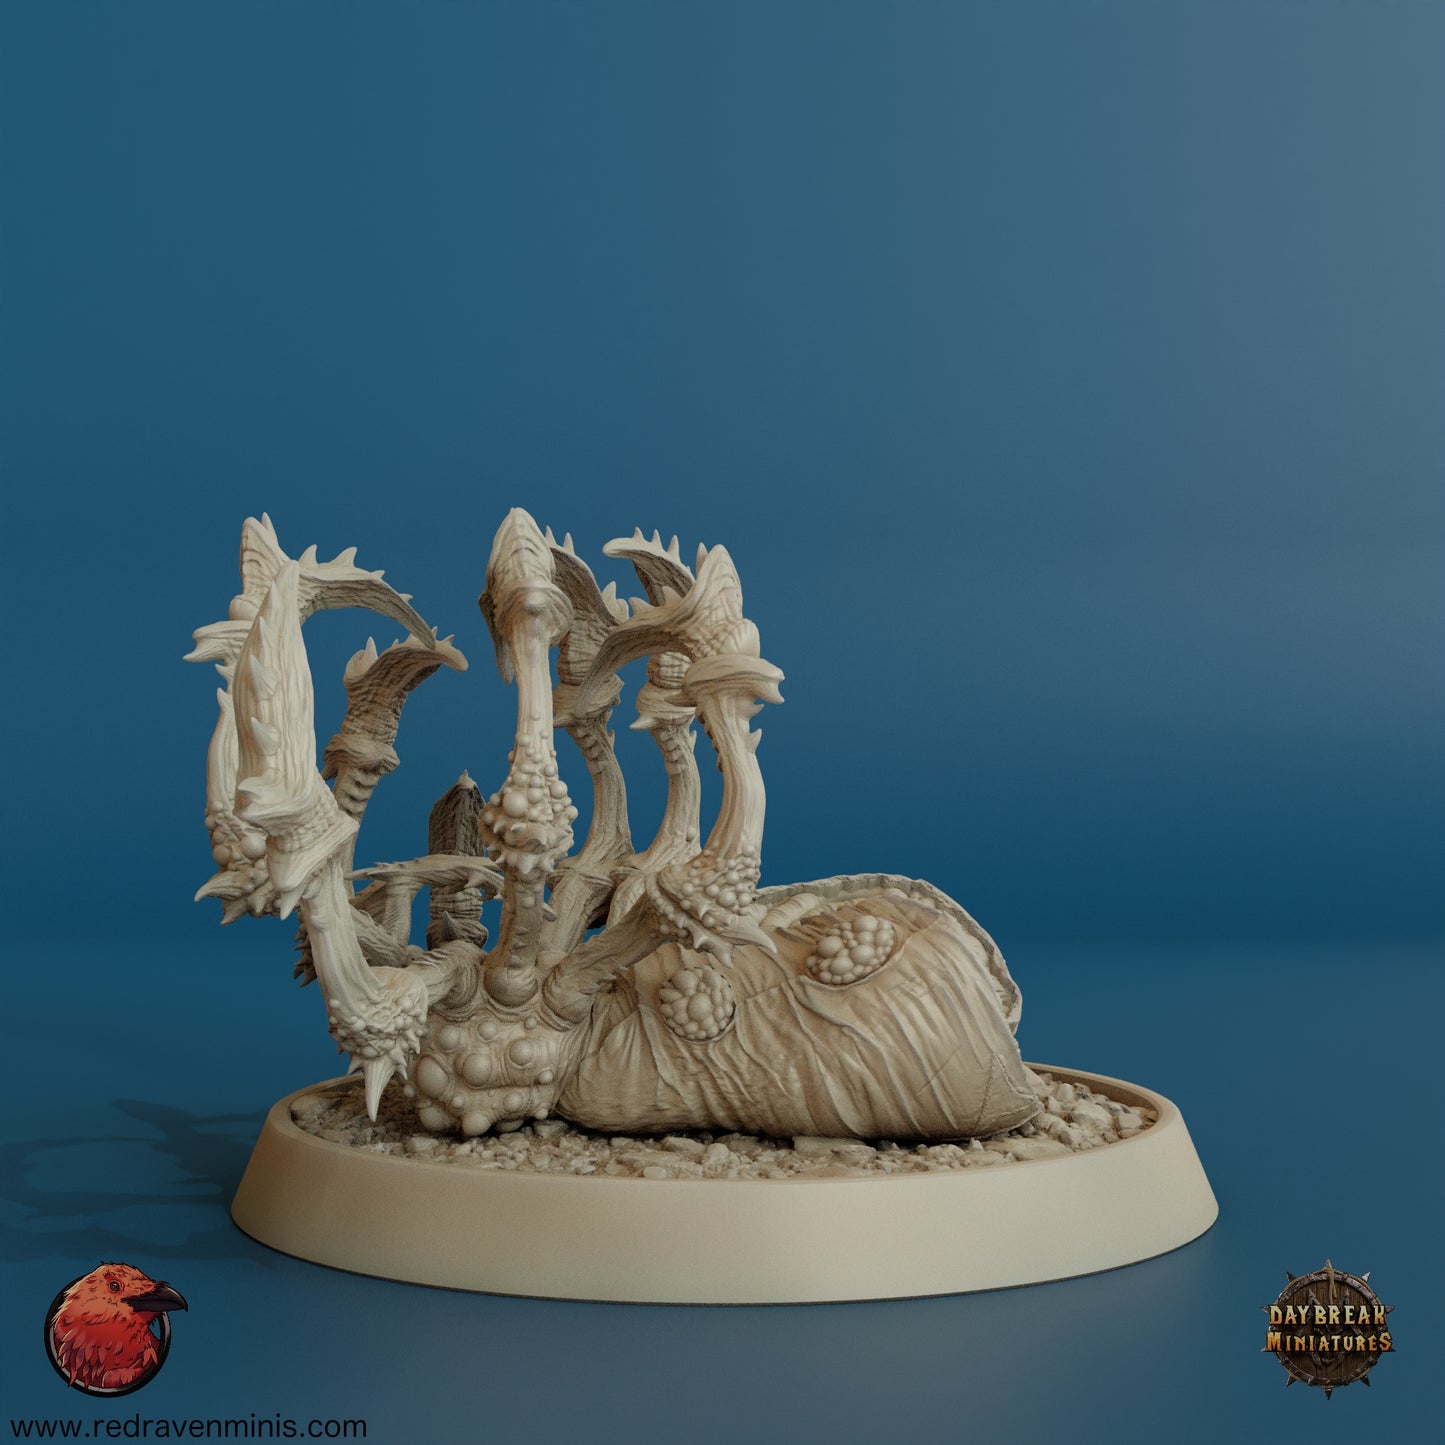 Giant Spider 4 • 32mm Scale Miniature